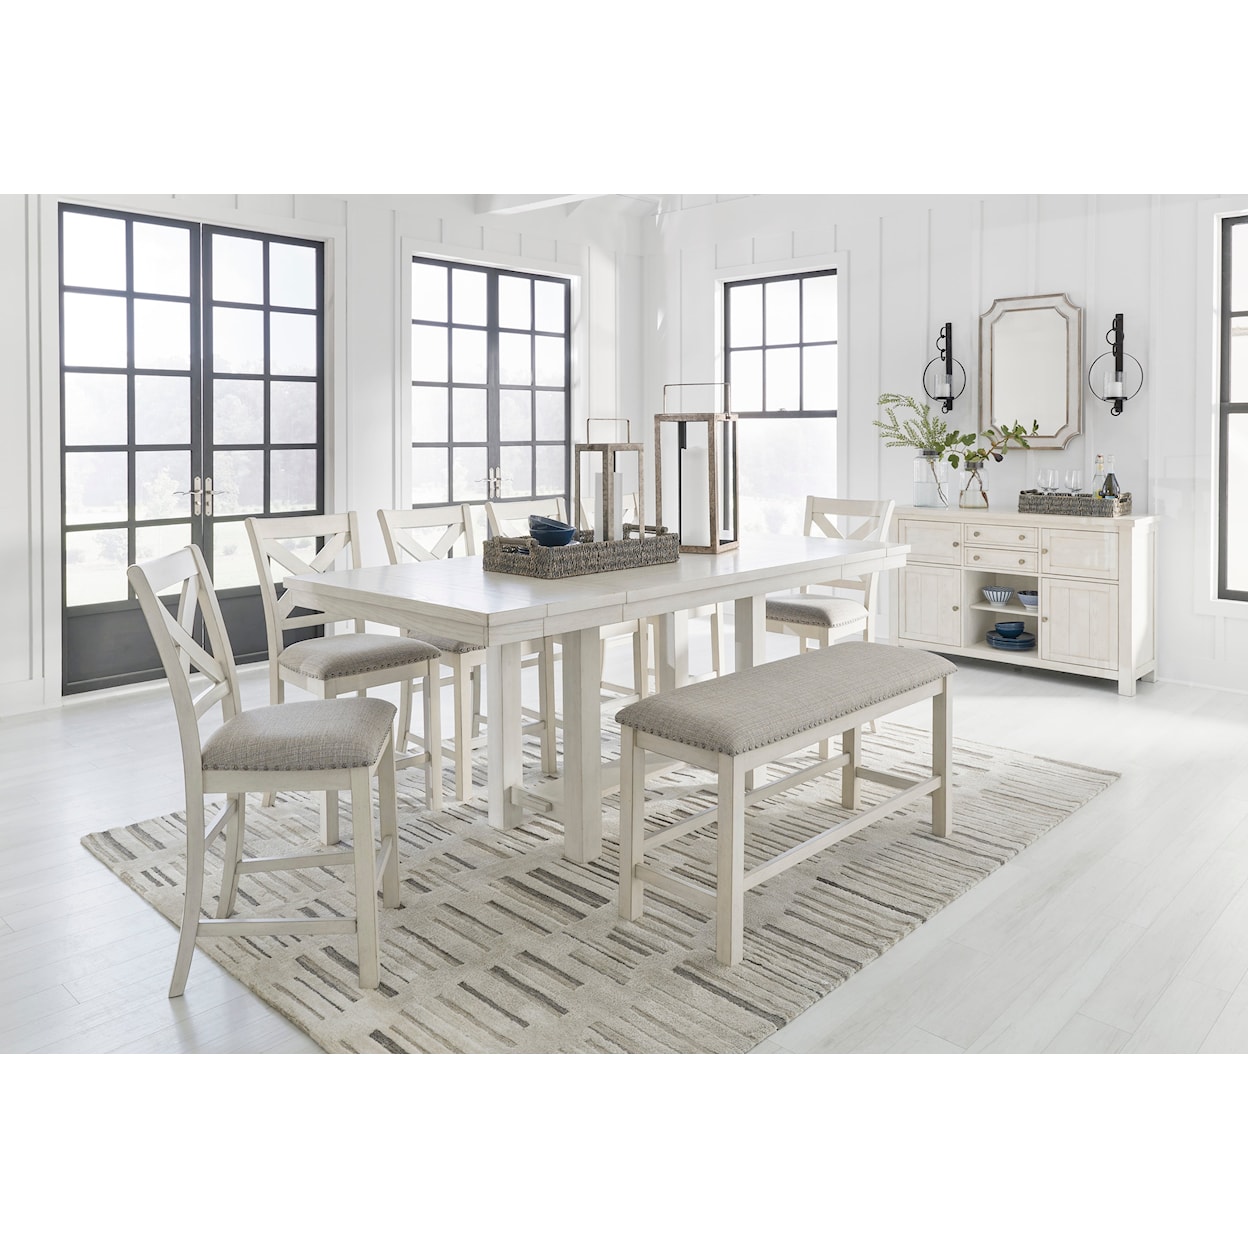 Benchcraft Robbinsdale Counter Dining Set